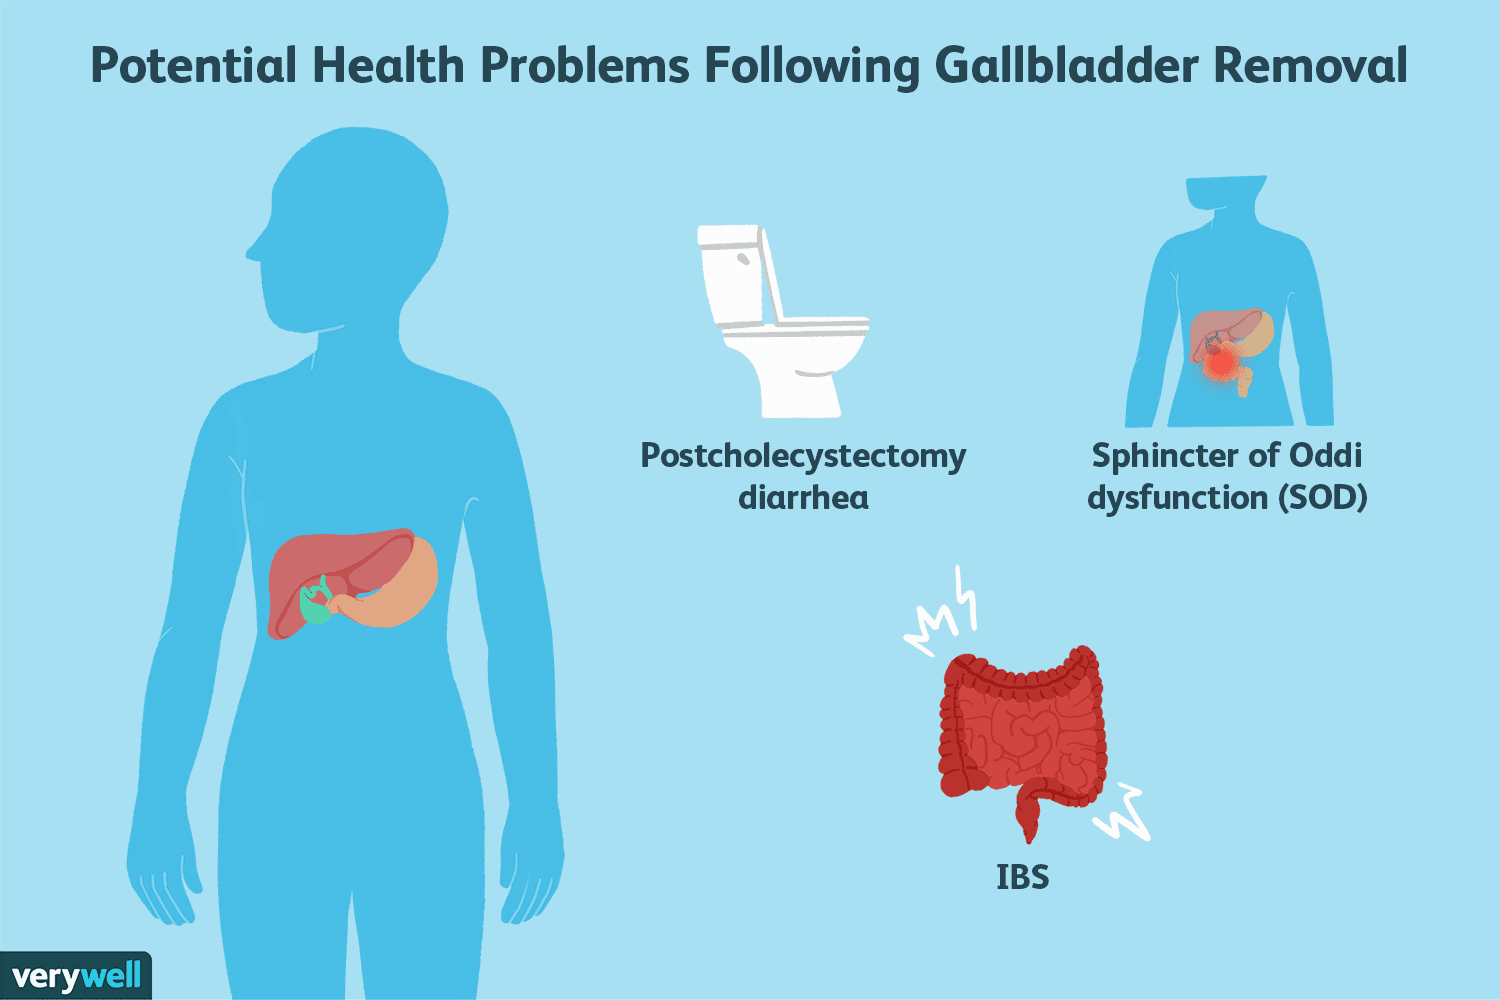 What to Do About IBS After Gallbladder Removal